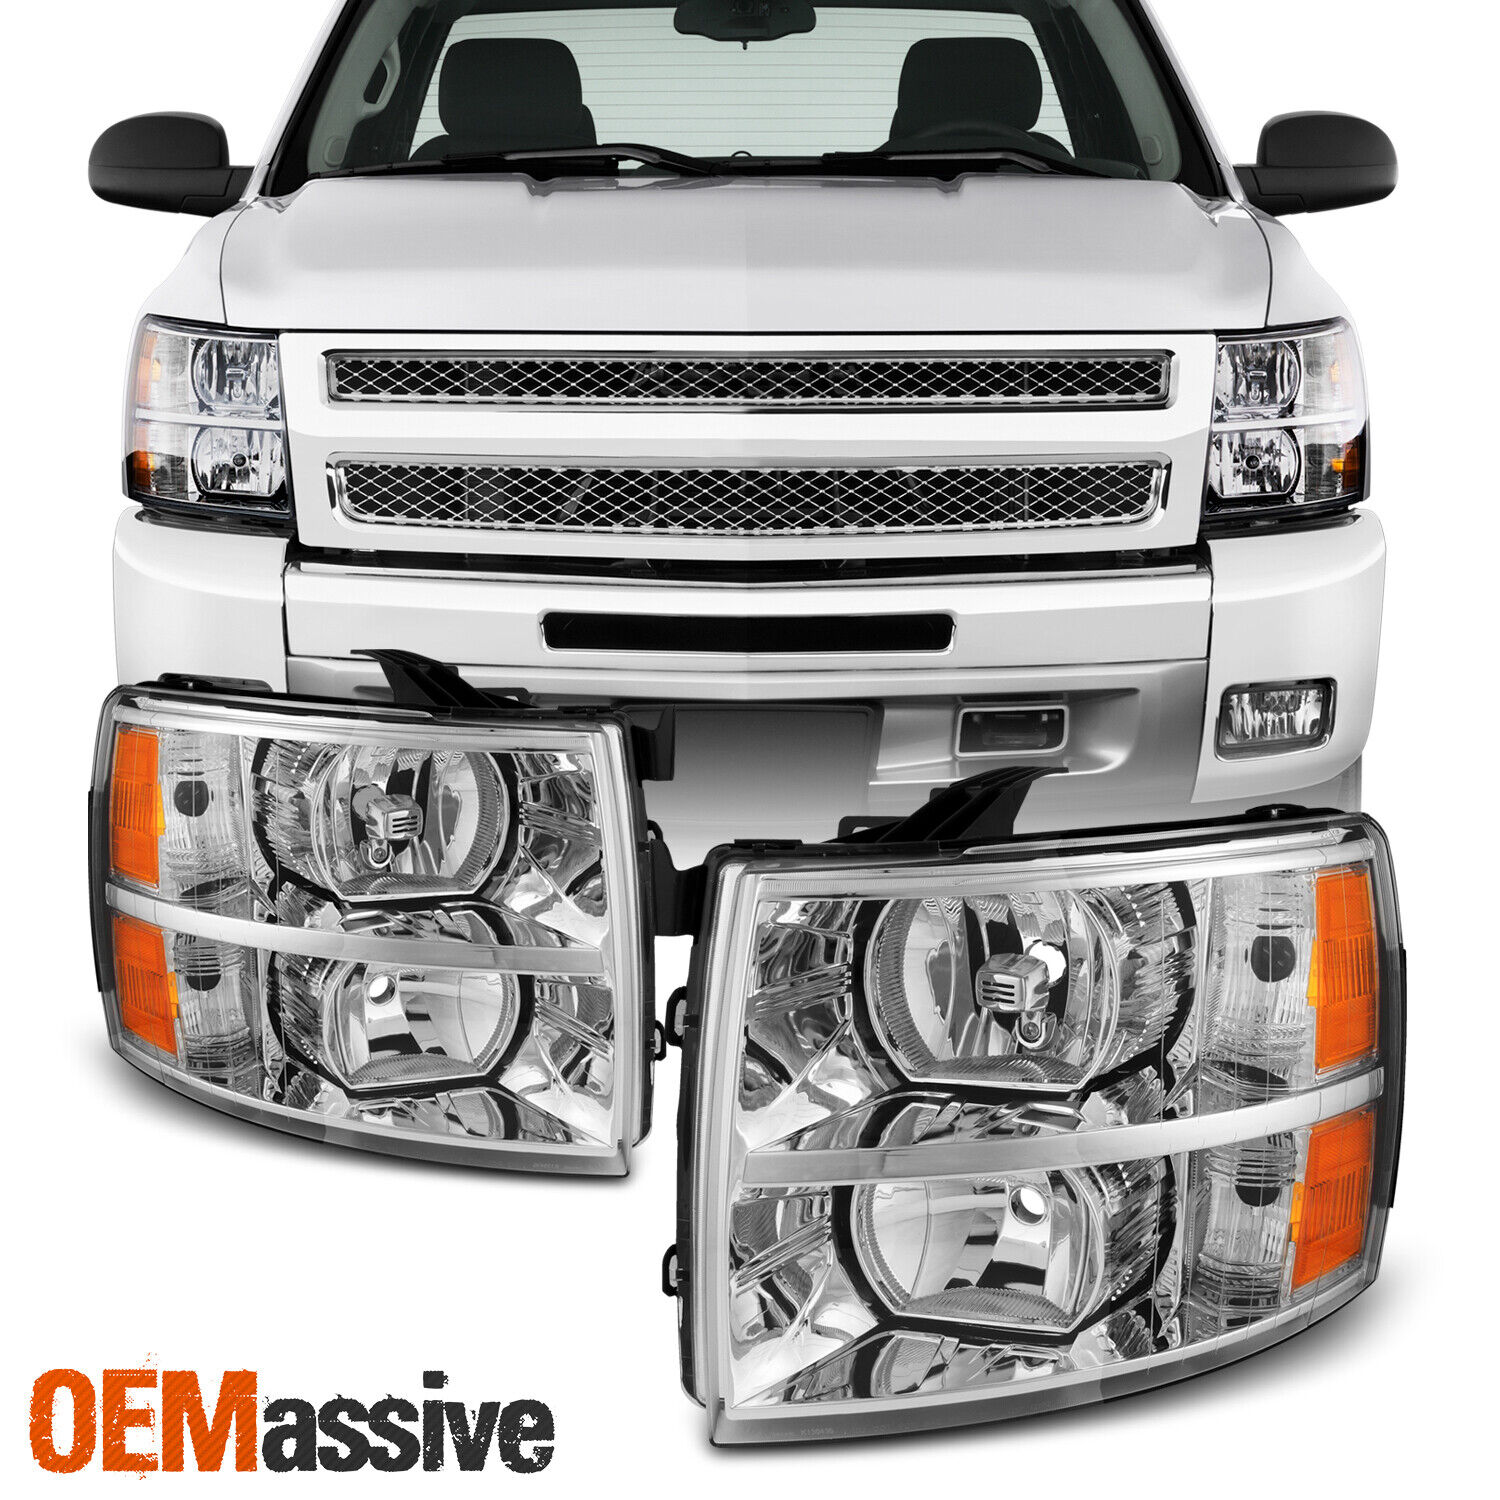 Fit 2007-2013 Chevy Silverado 1500 2500 3500 Replacement Headlights L+R Pair